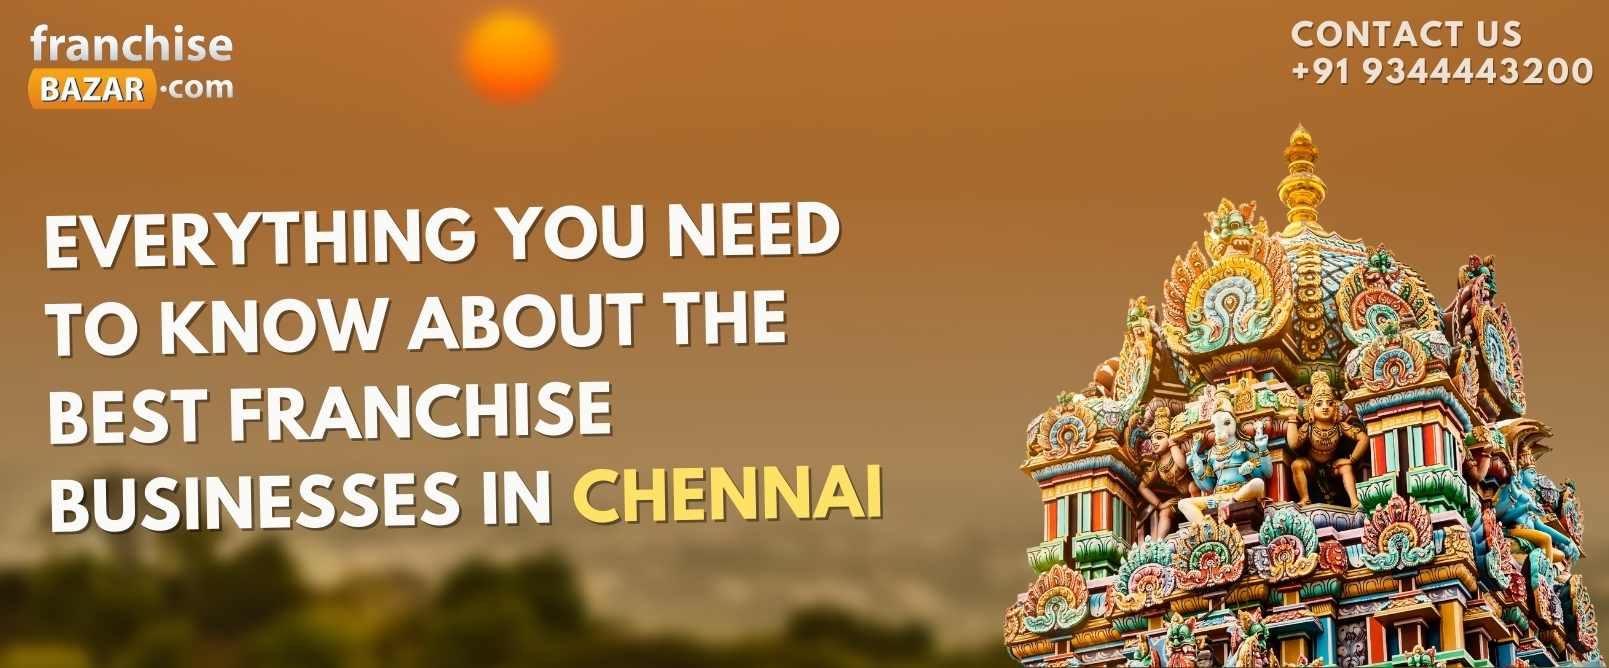 Everything You Need To Know About The Best Franchise Businesses in Chennai